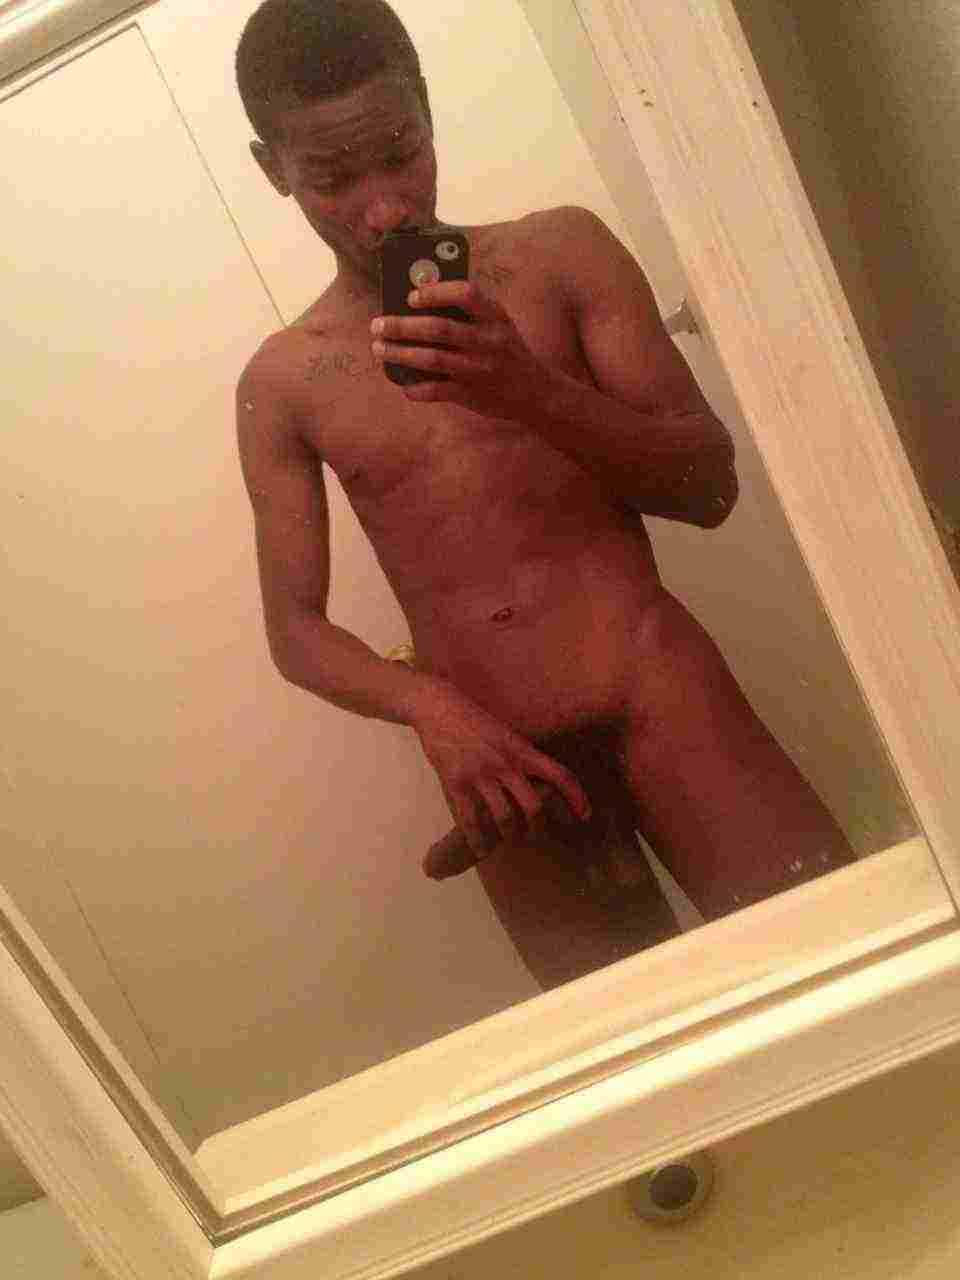 black-dicks-r-us:  HORNY FOR BLACK DICK? There are over 10,000 Black Gay Videos @